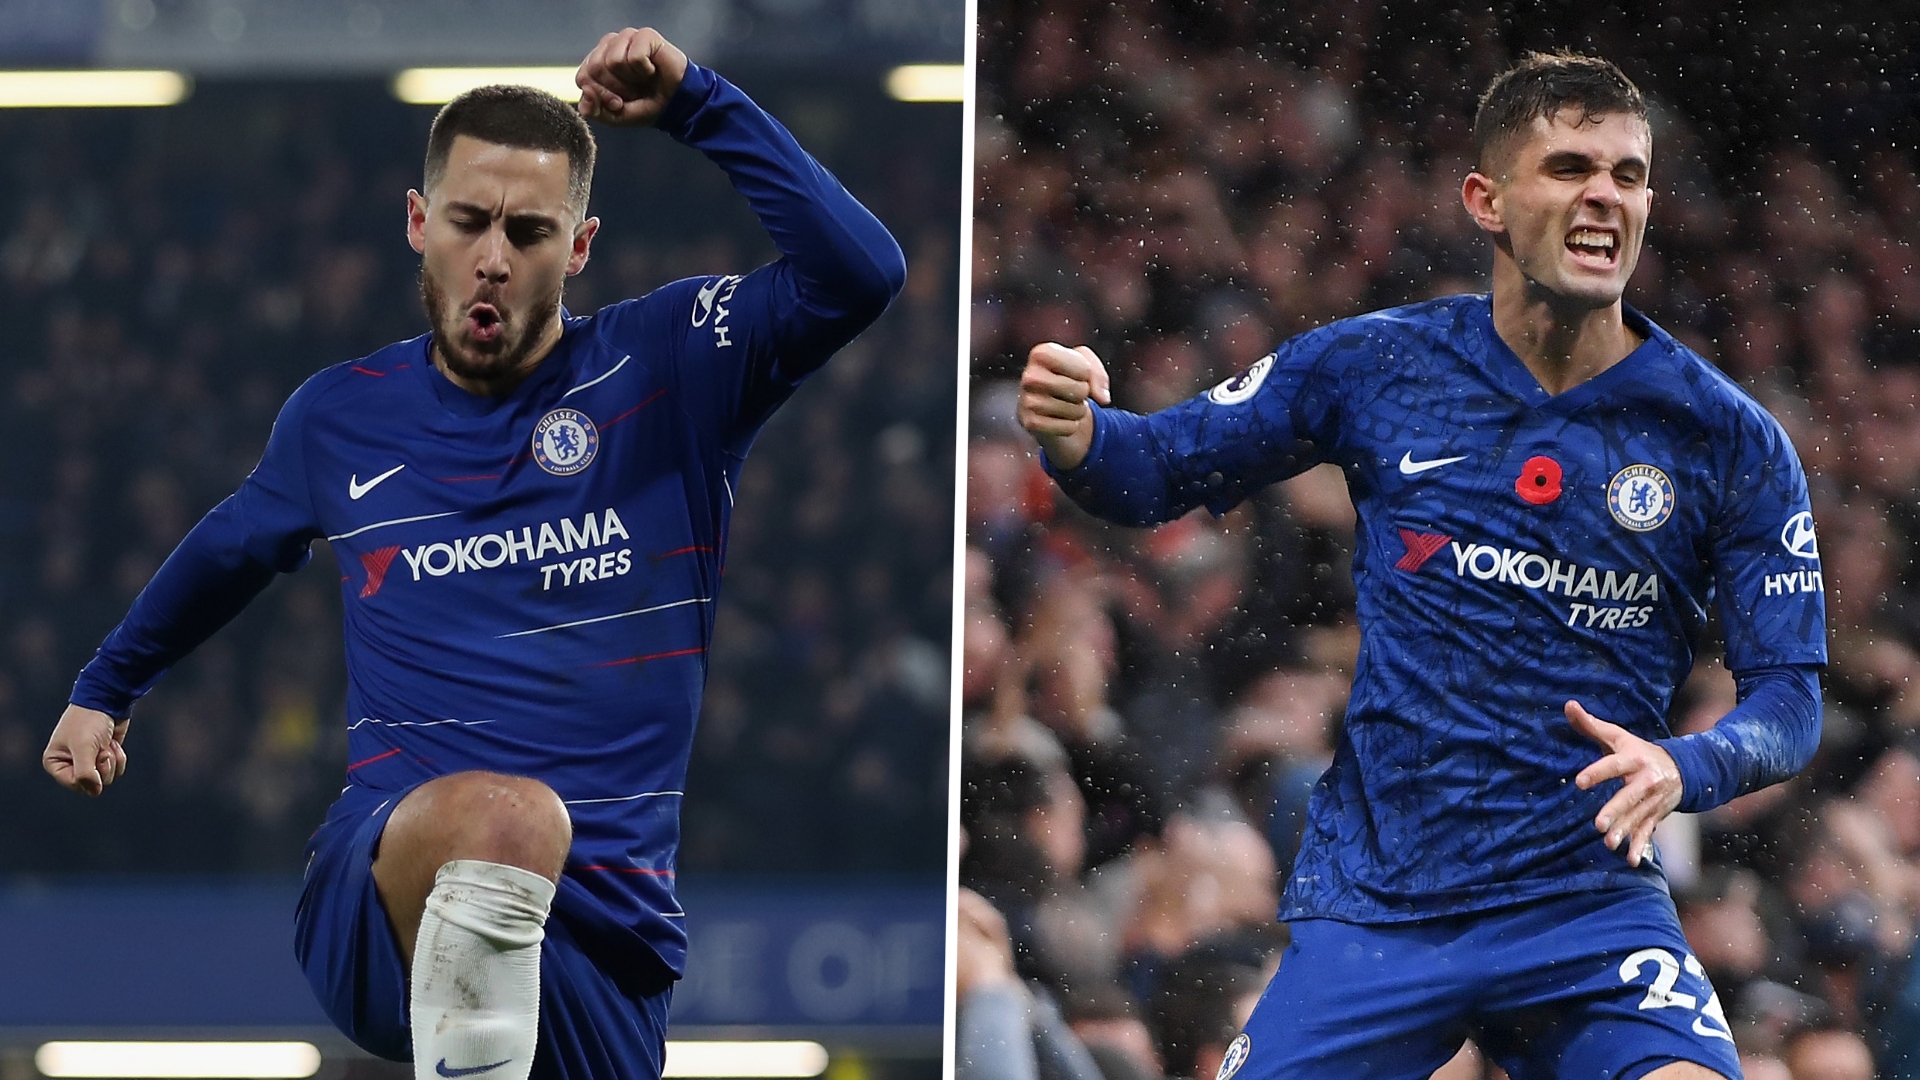 ‘If Pulisic stays at Chelsea, he’ll be better than Hazard’ – USMNT star backed by Cascarino to outshine Belgian